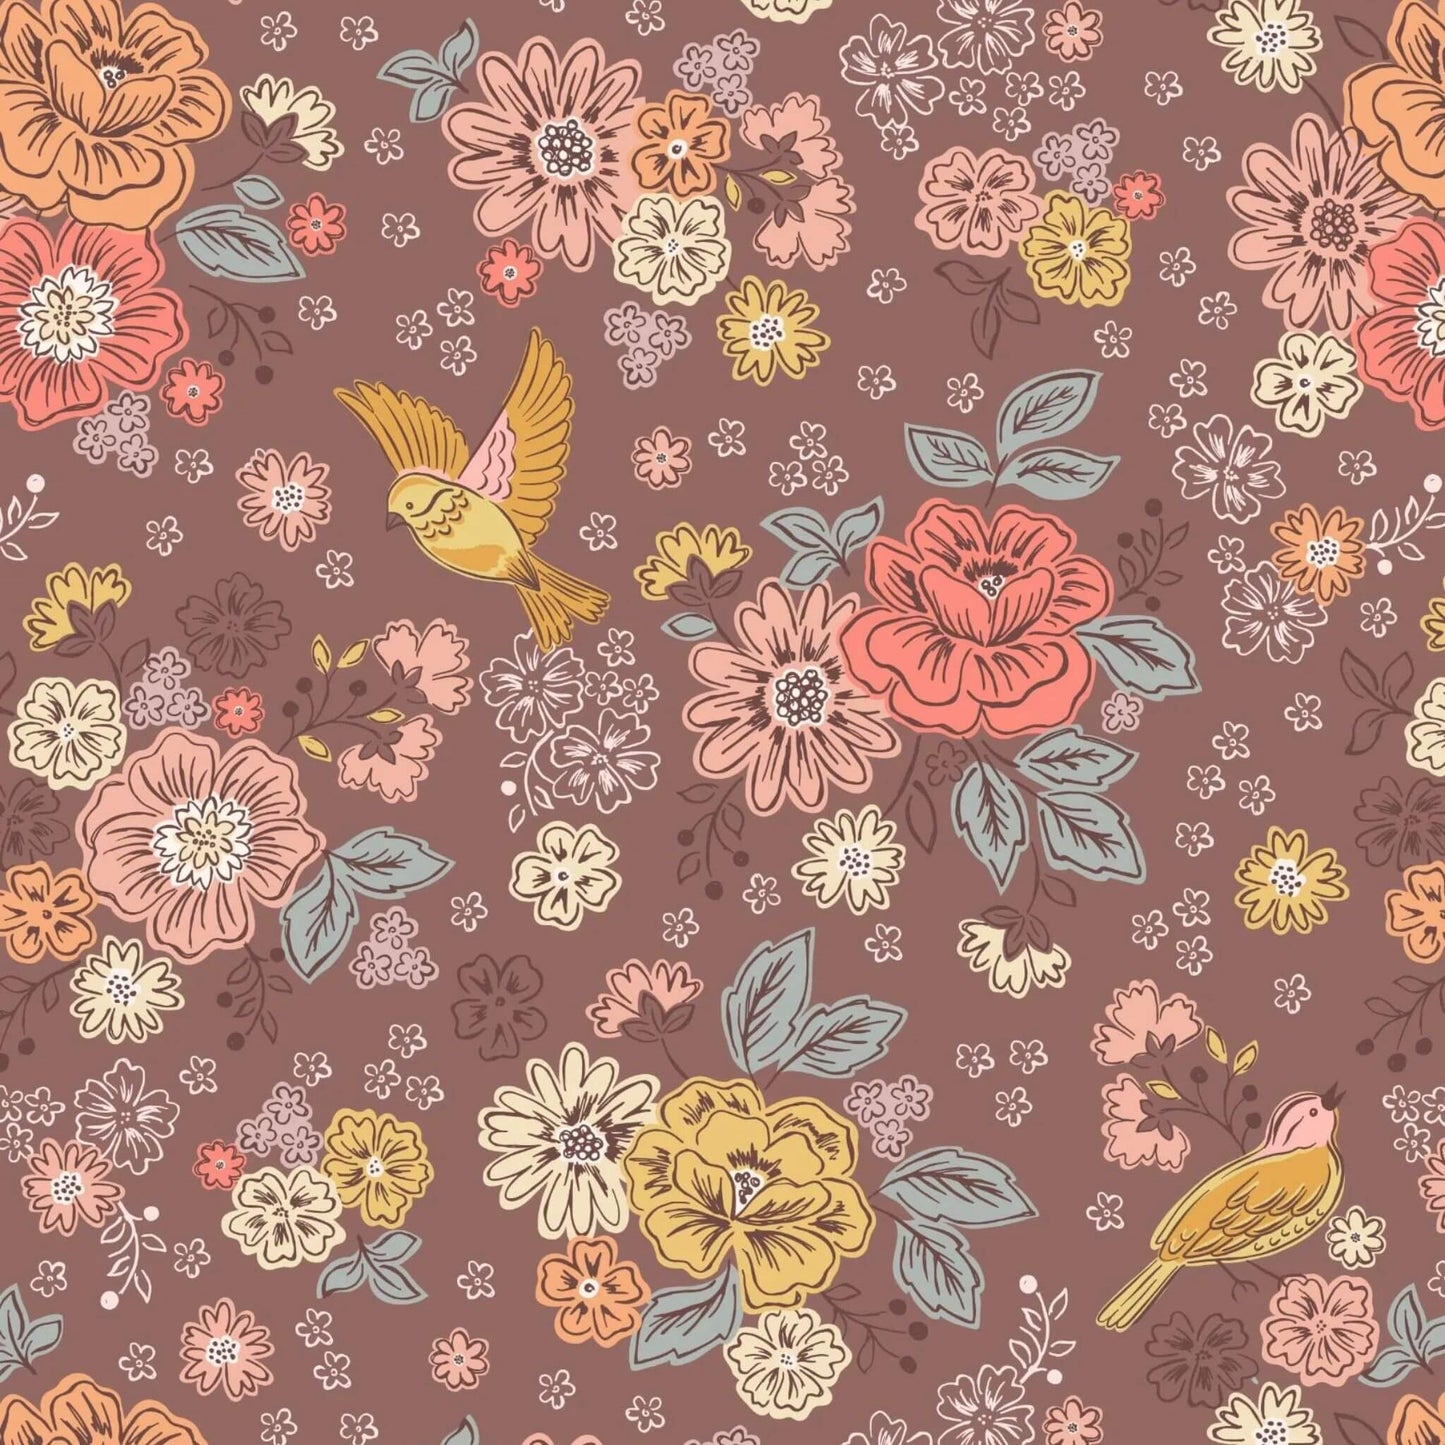 Songbirds and Flowers - Hannahs Flowers Fabric Range - Lewis and Irene - Soft Brown